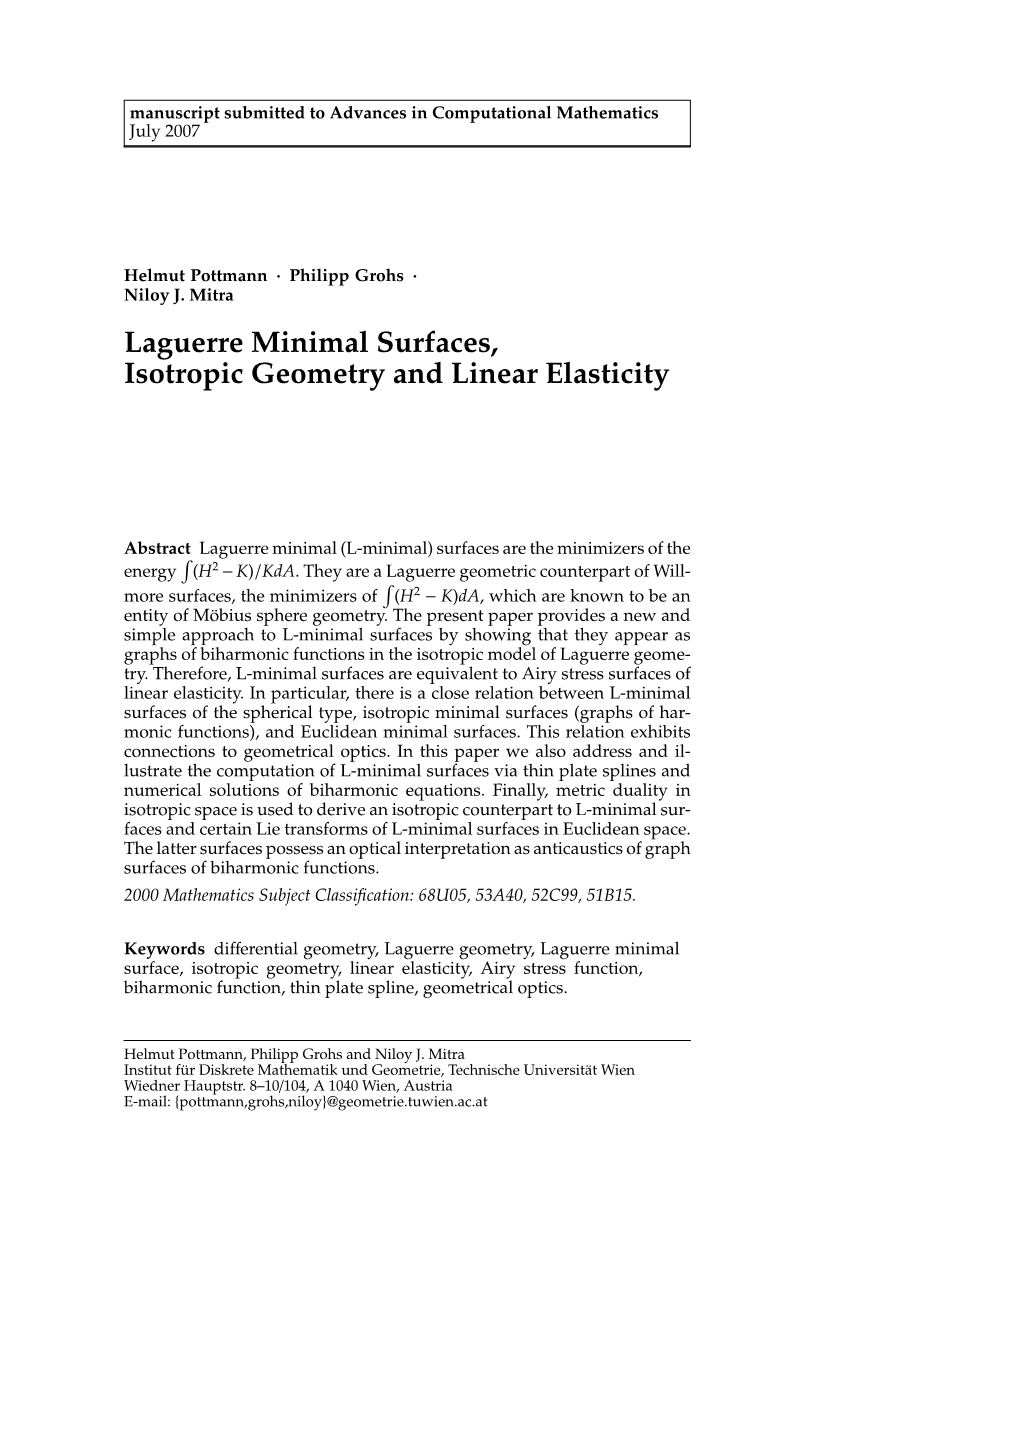 Laguerre Minimal Surfaces, Isotropic Geometry and Linear Elasticity